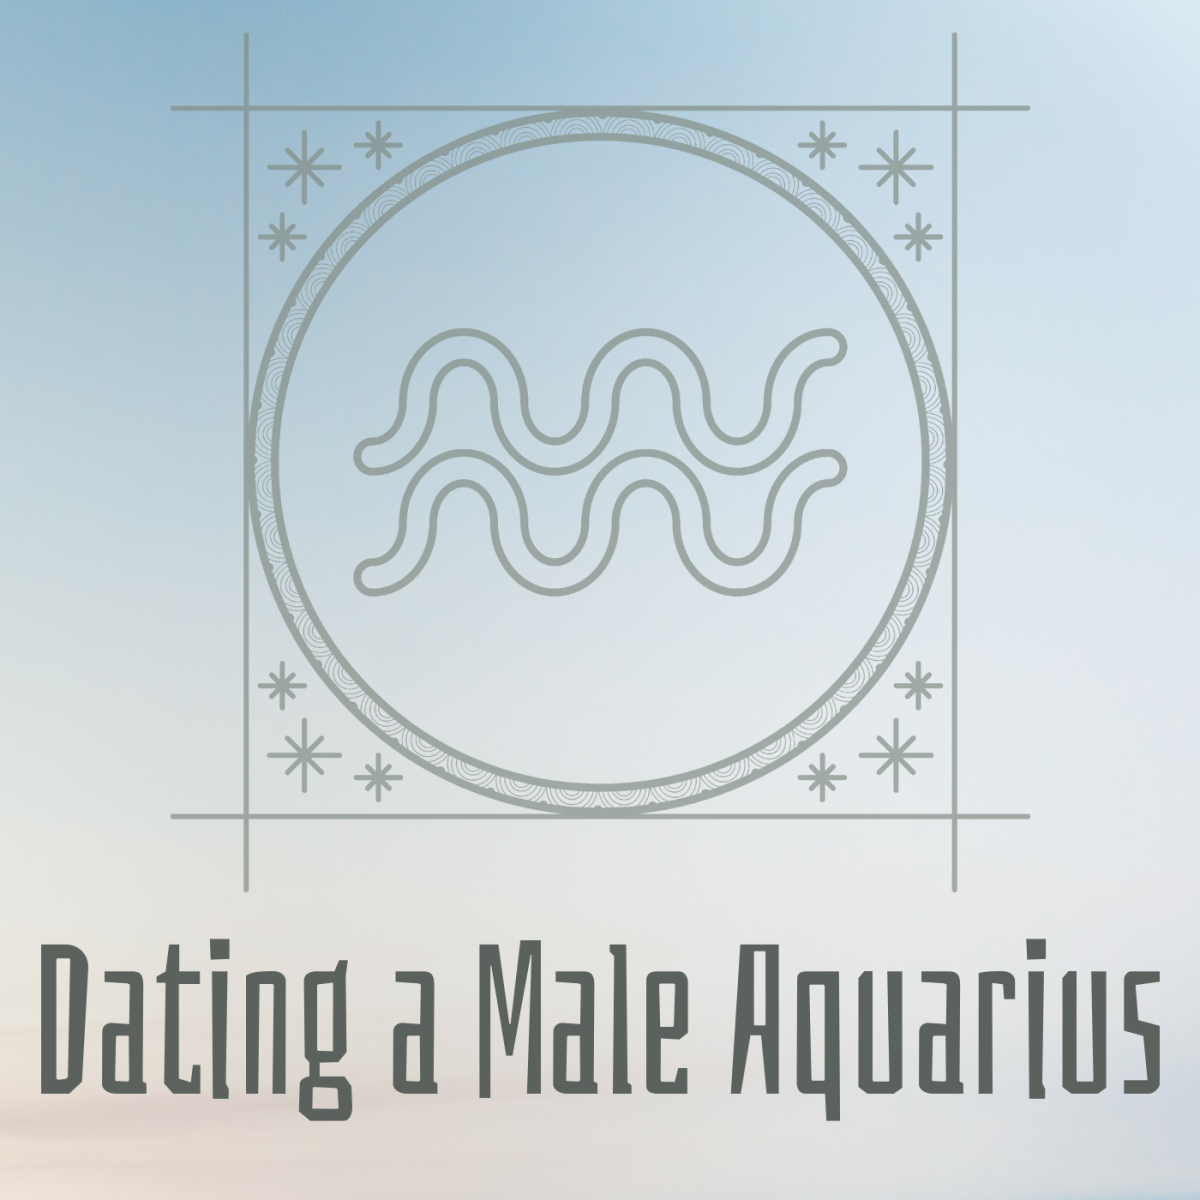 Aquarius men are not for me, and here's why.